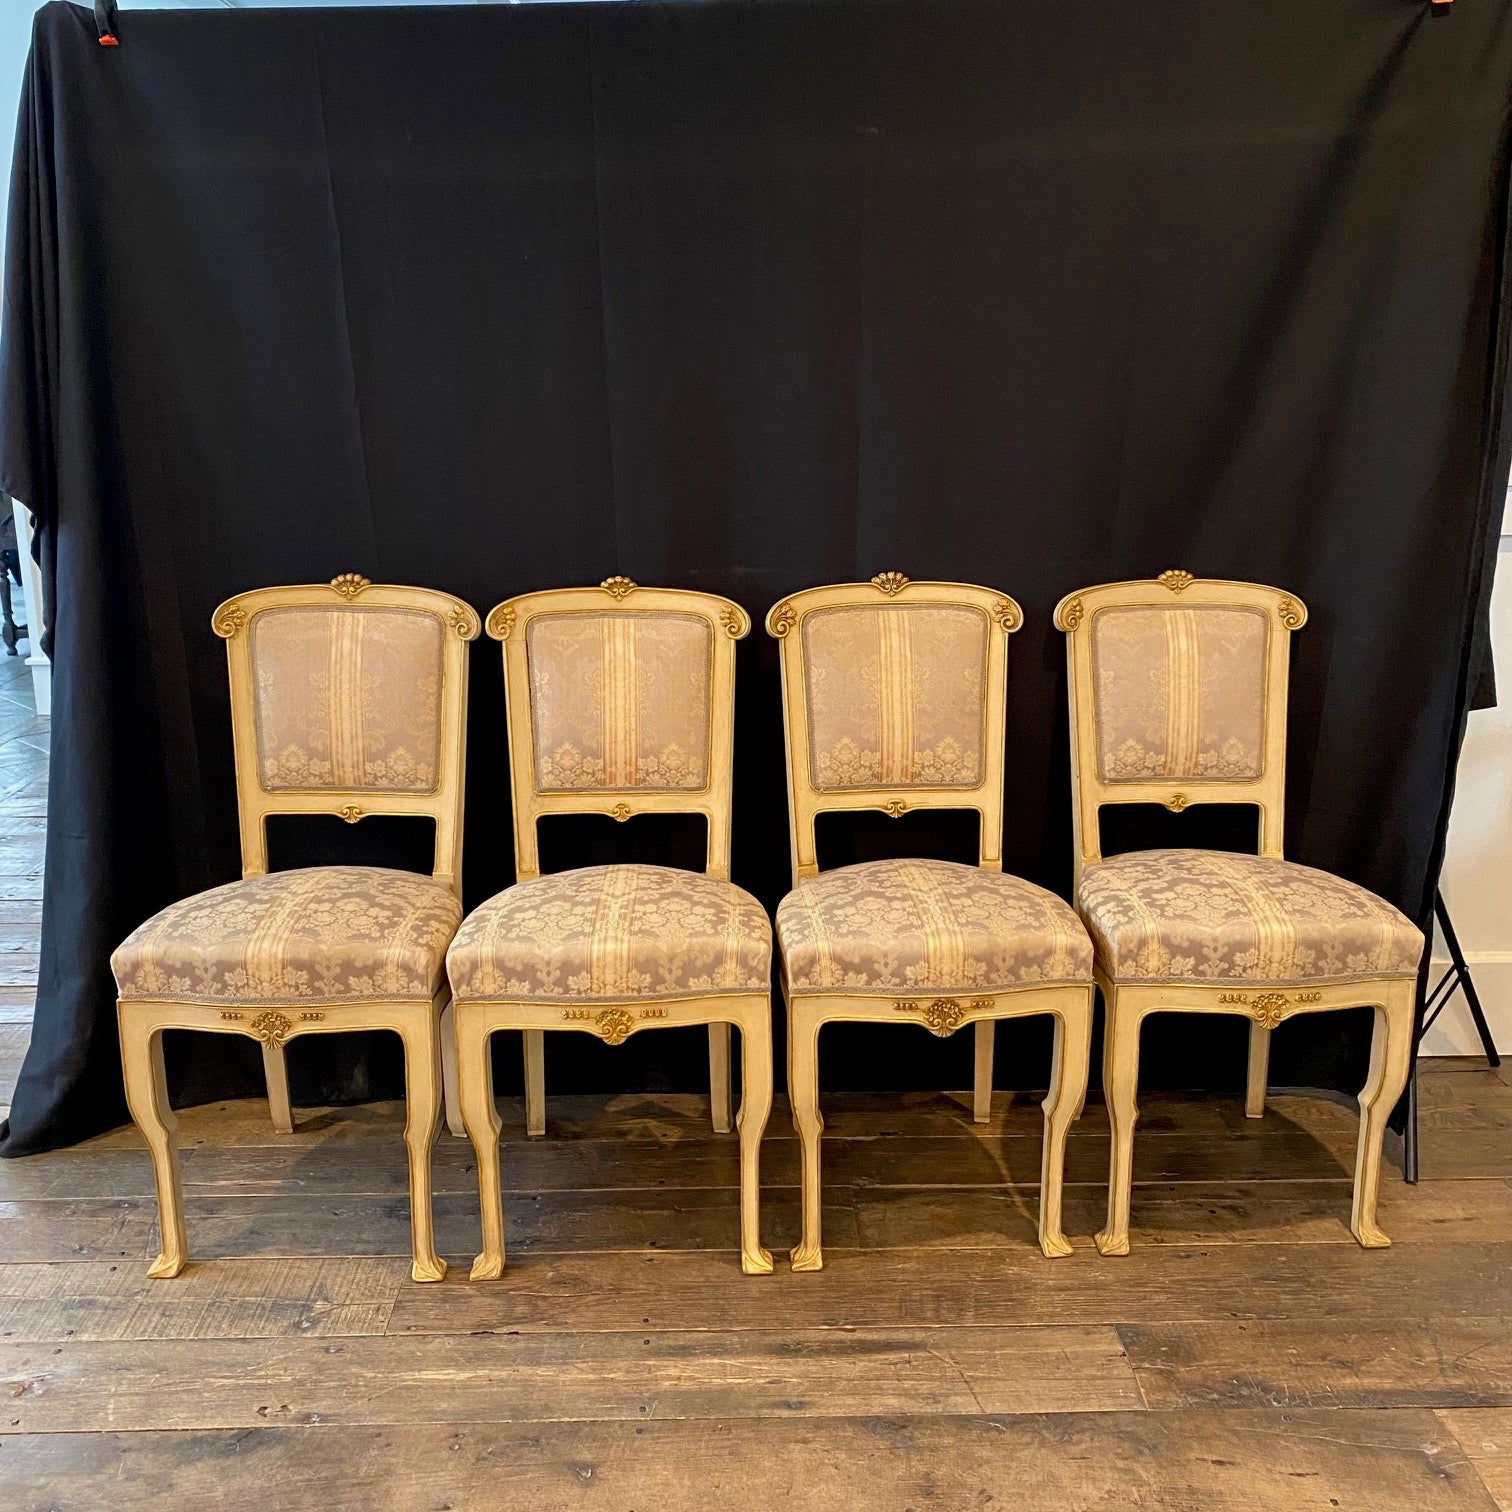 Set of four lovely and elegant Art Nouveau Italian side chairs, dining chairs or accent chairs, all with beautiful original muted striped damask fabric.  Part of a 10-piece Art Nouveau complete original salon suite set hand carved and painted with